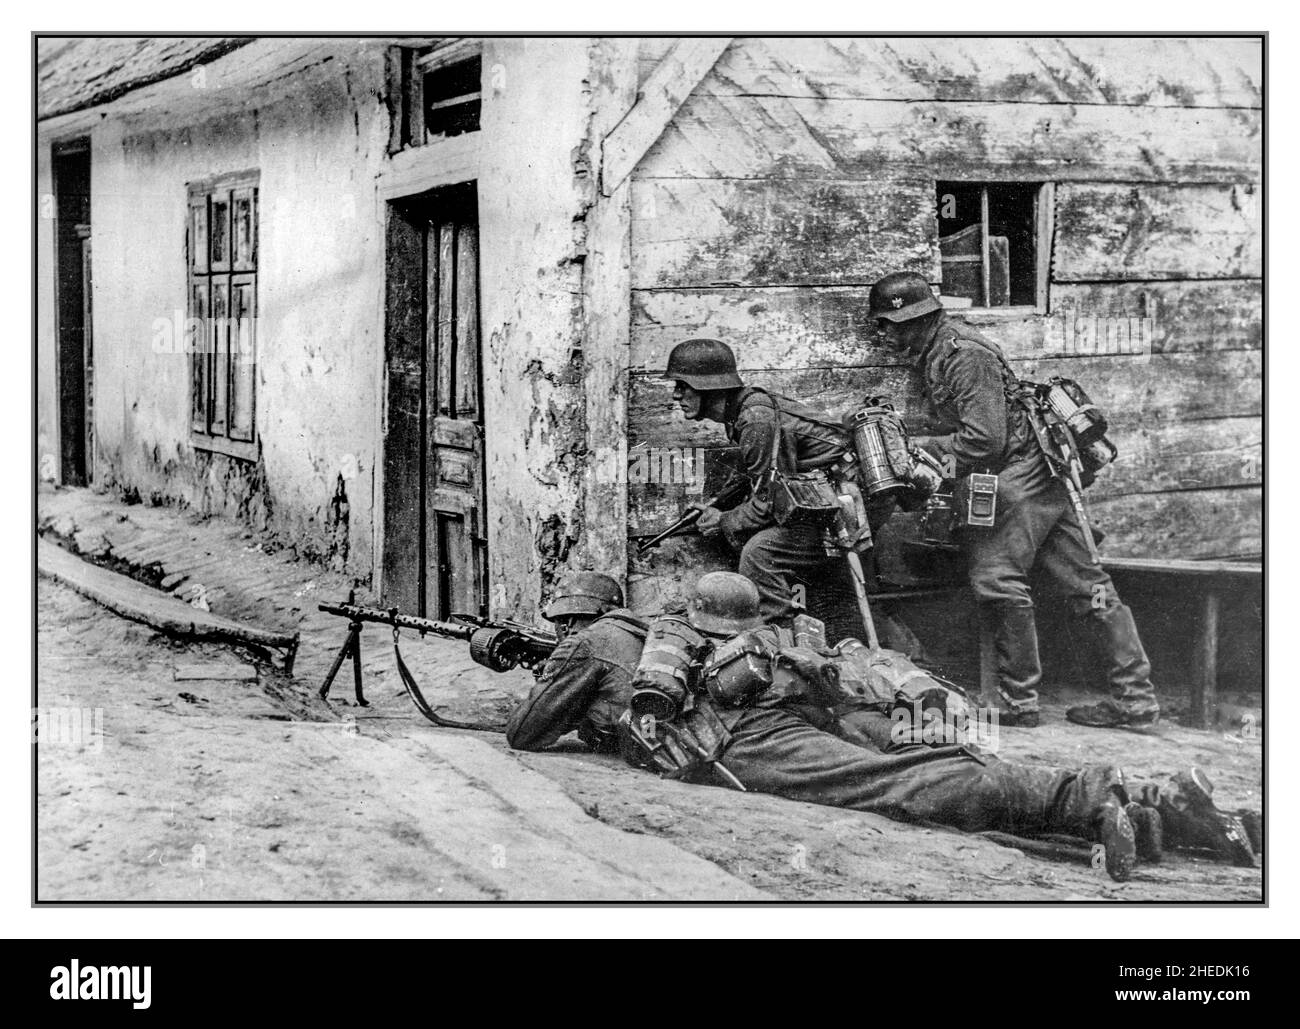 Operation Barbarossa WW2 Street fights in a village on the Eastern Front. Four Nazi German soldiers are hiding behind the corner of the house. Nazi German soldier with MG-34 machine gun in foreground. Stock Photo